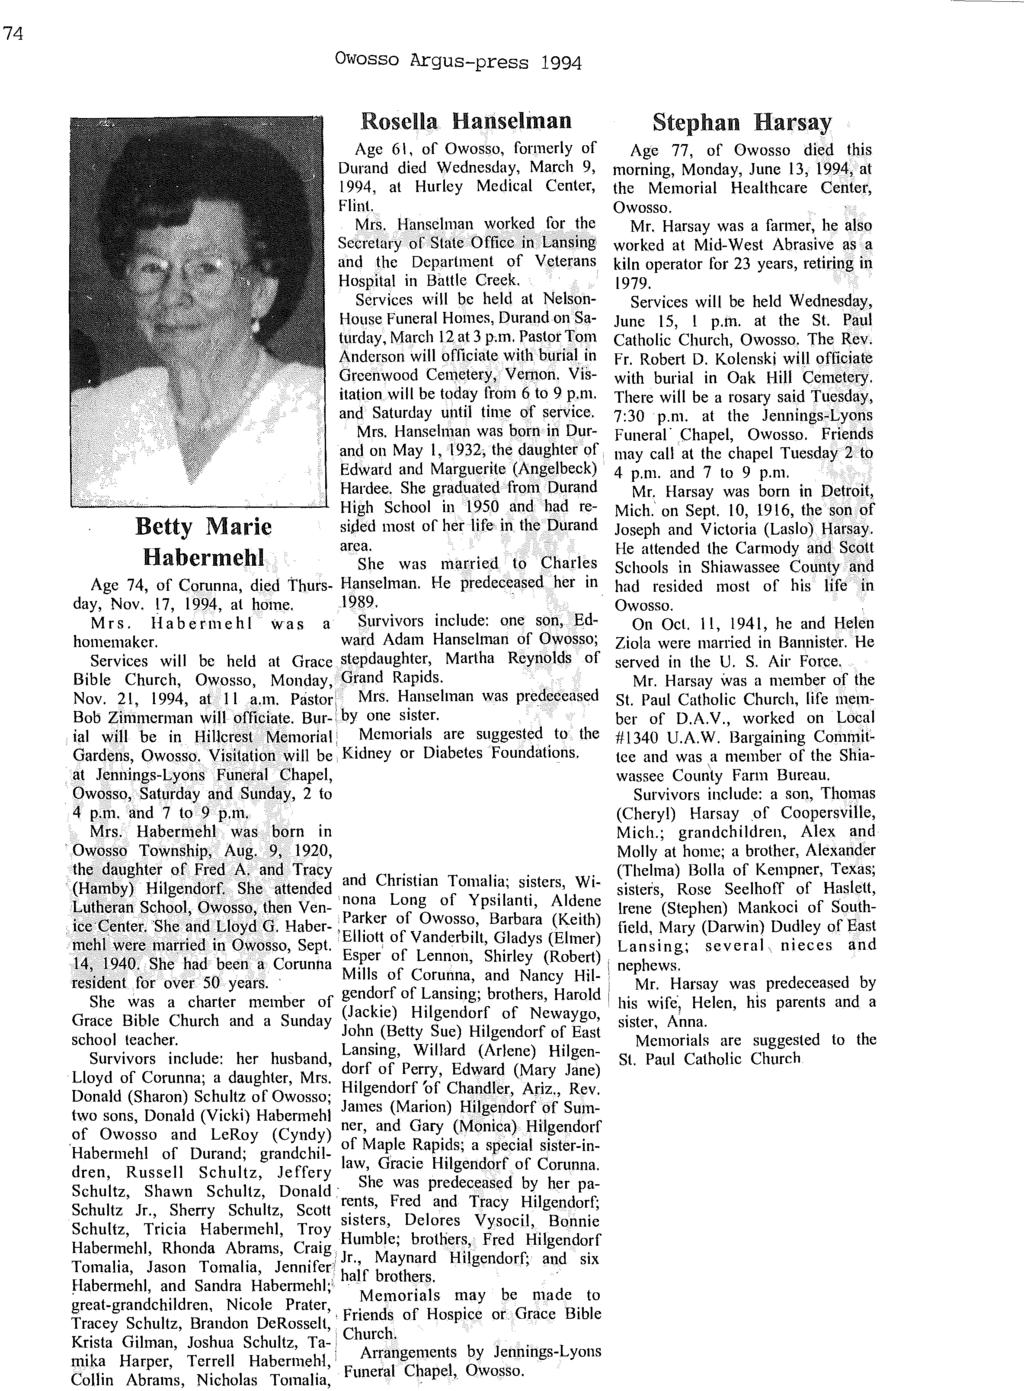 74 Owosso Argus-press 1994 Rosella Hanselman Stephan Harsay Age 61, of Owosso, formerly of Age 77, of Owosso died this Durand died Wednesday, March 9, morning, Monday, June 13, 1994, at 1994, at